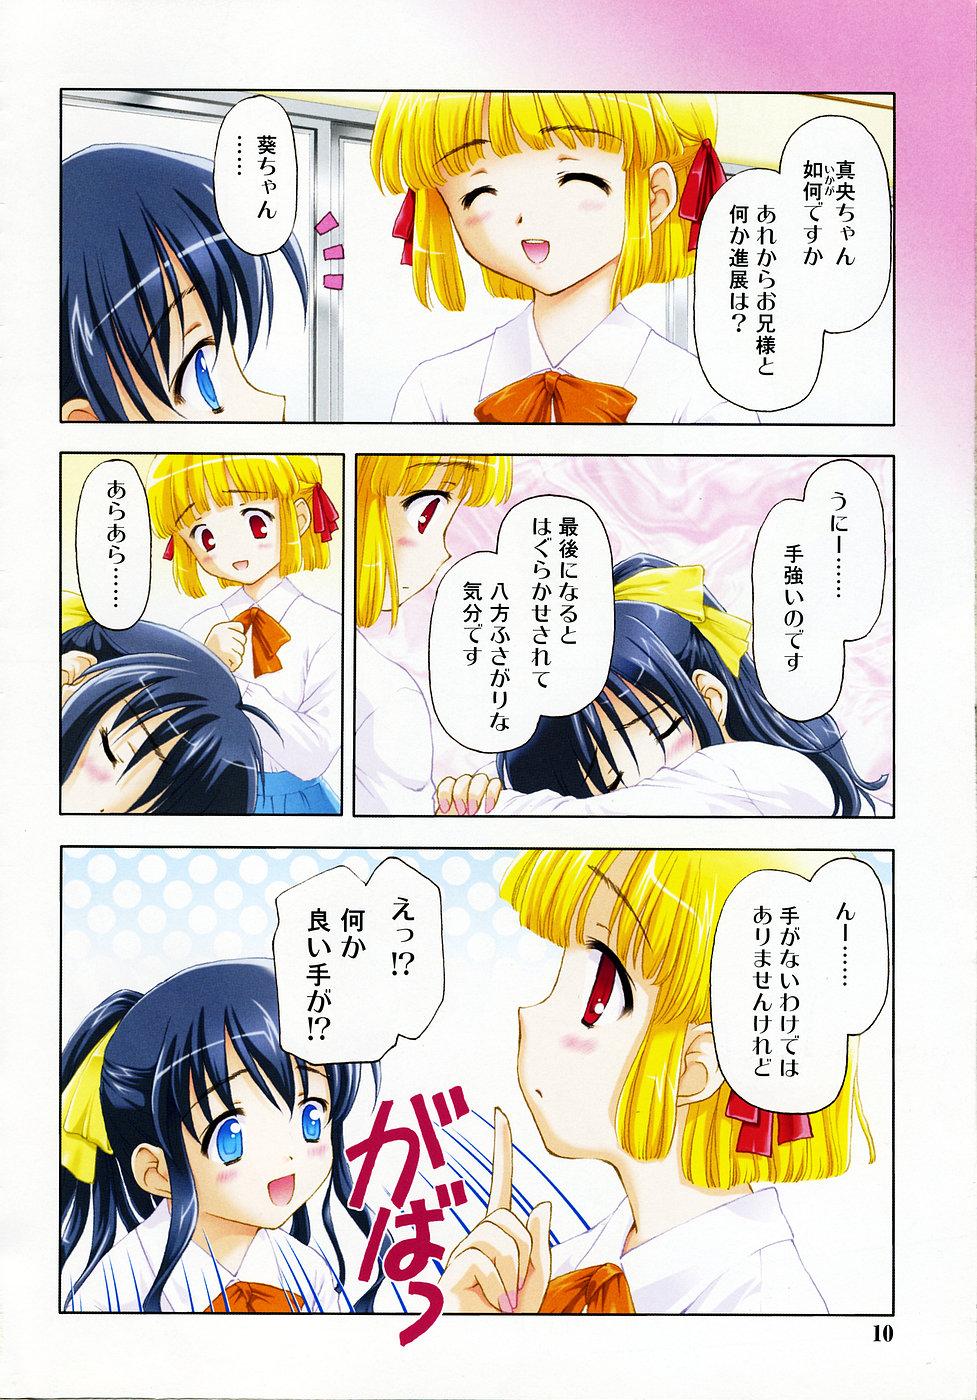 Tight Comic Rin Vol.04 2005-04 Pick Up - Page 10